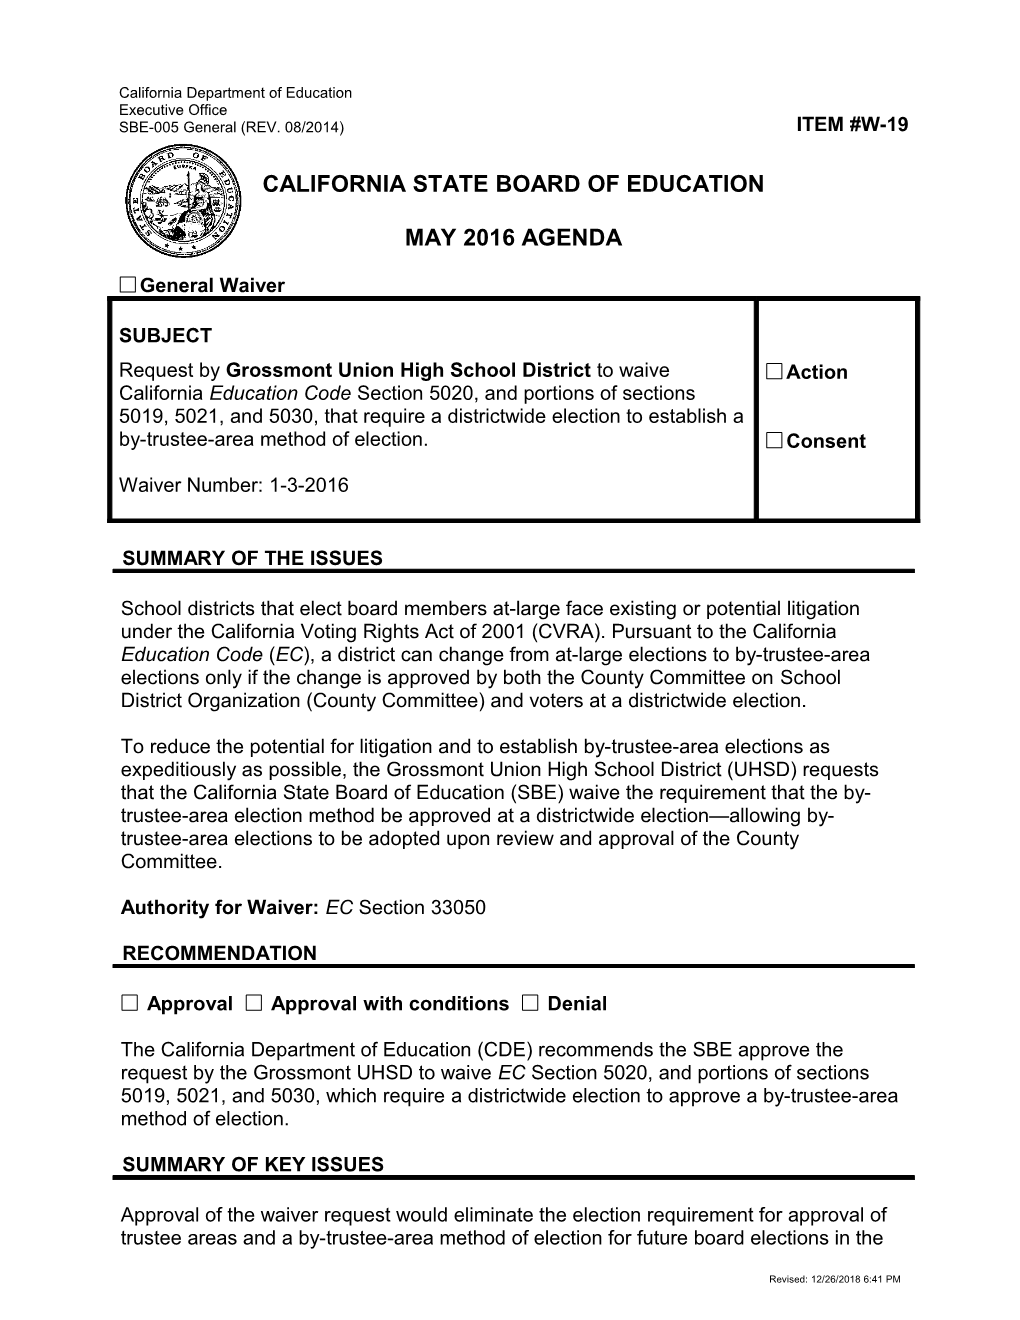 May 2016 Waiver Item W-19 - Meeting Agendas (CA State Board of Education)